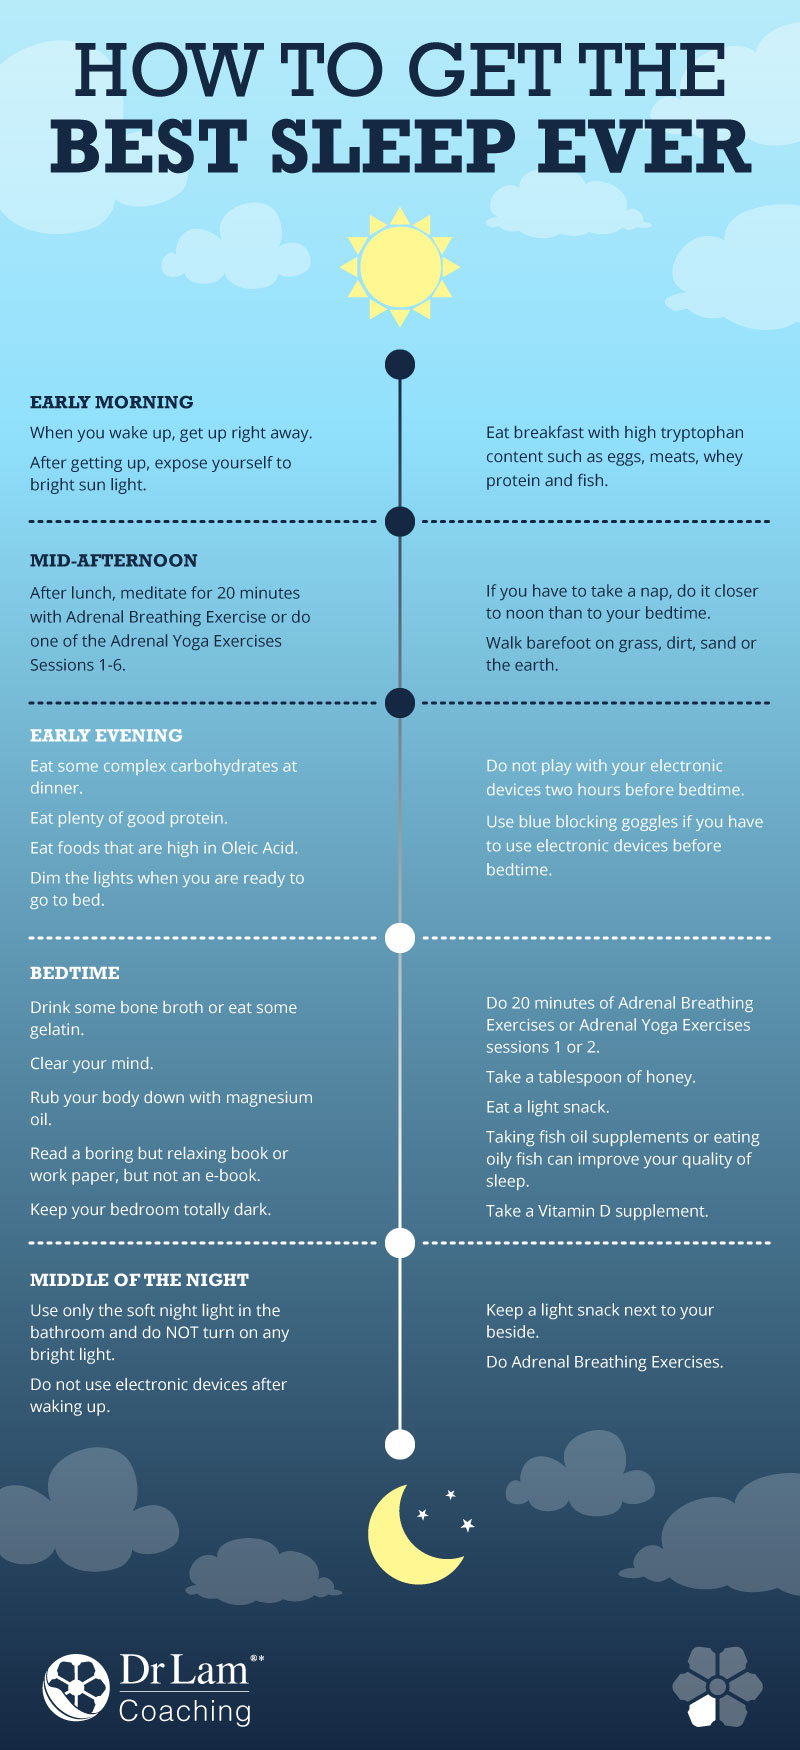 Check out this easy to understand infographic on how to get the best sleep